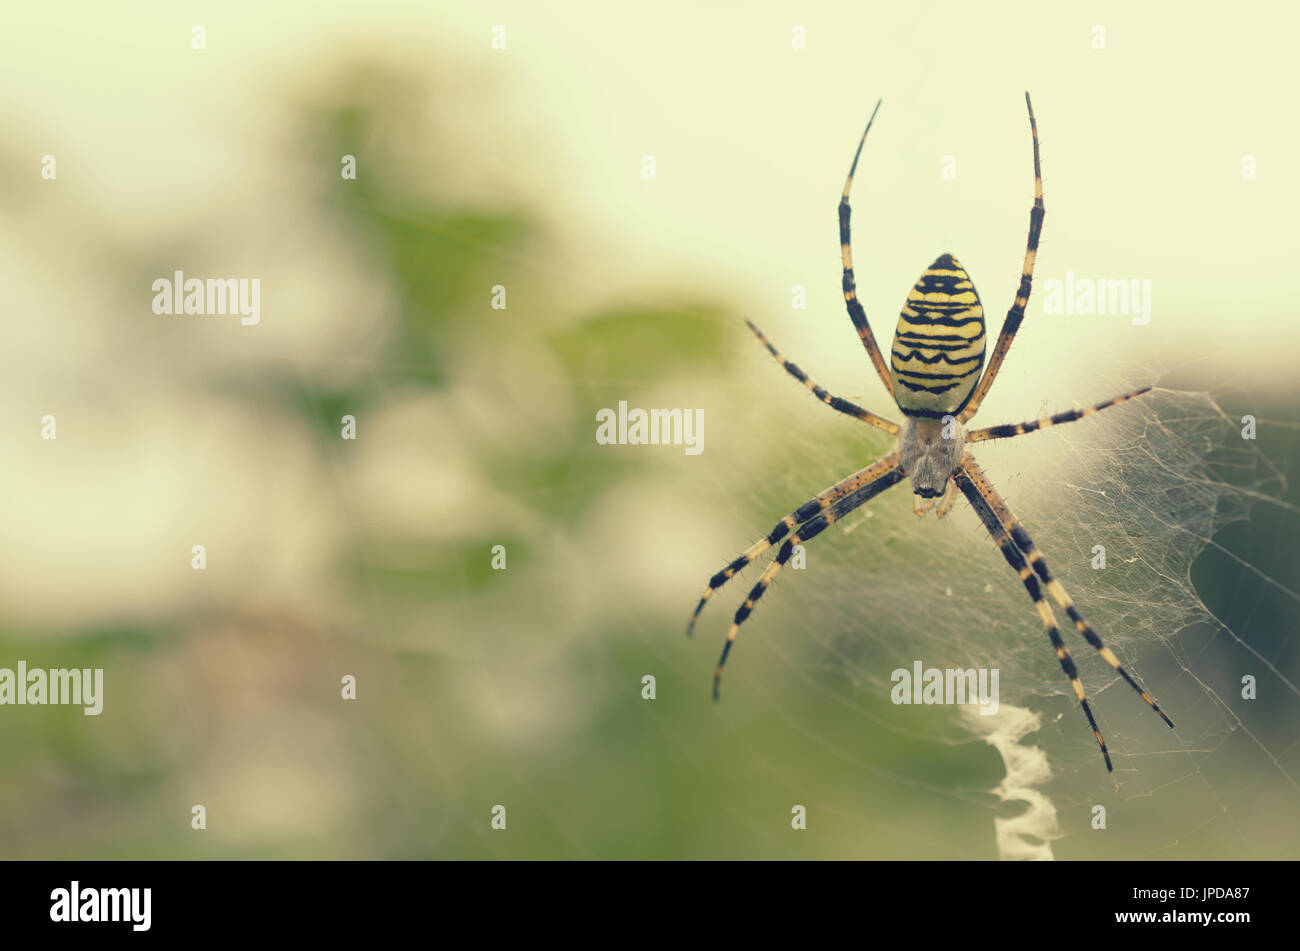 Black and yellow striped spider on the web Stock Photo